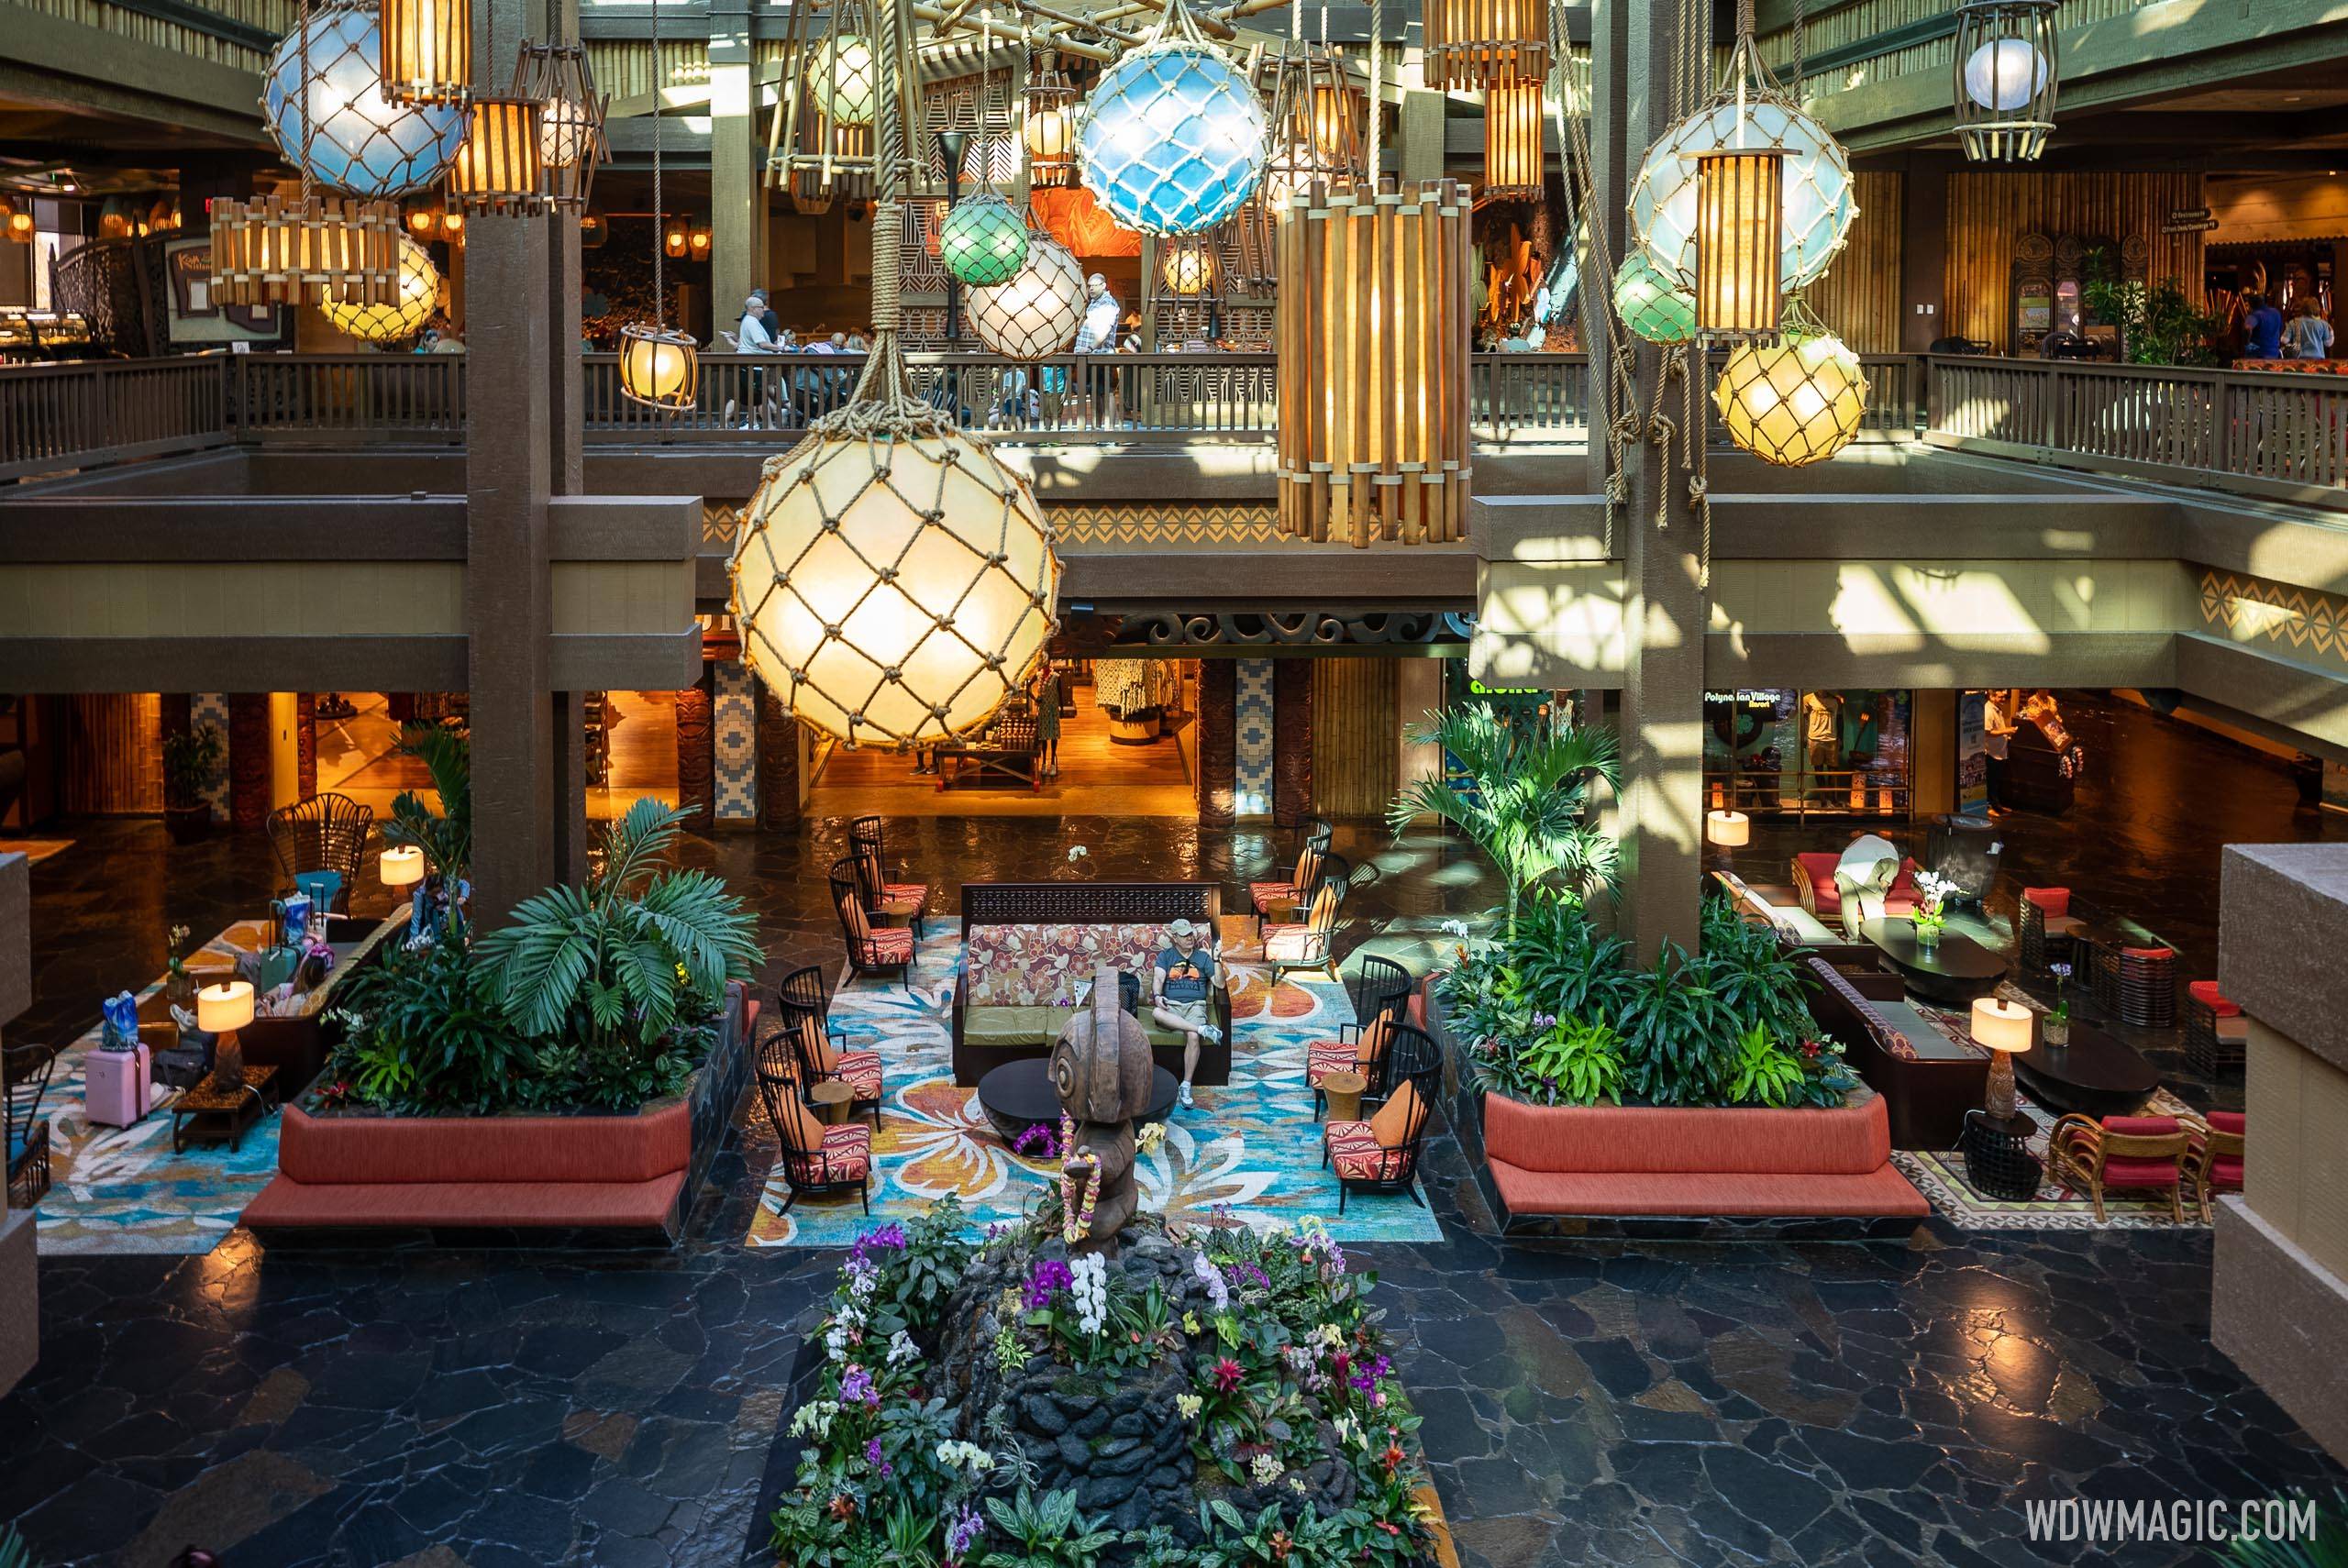 Lobby at Disney's Polynesian Village Resort gets an update with new soft goods